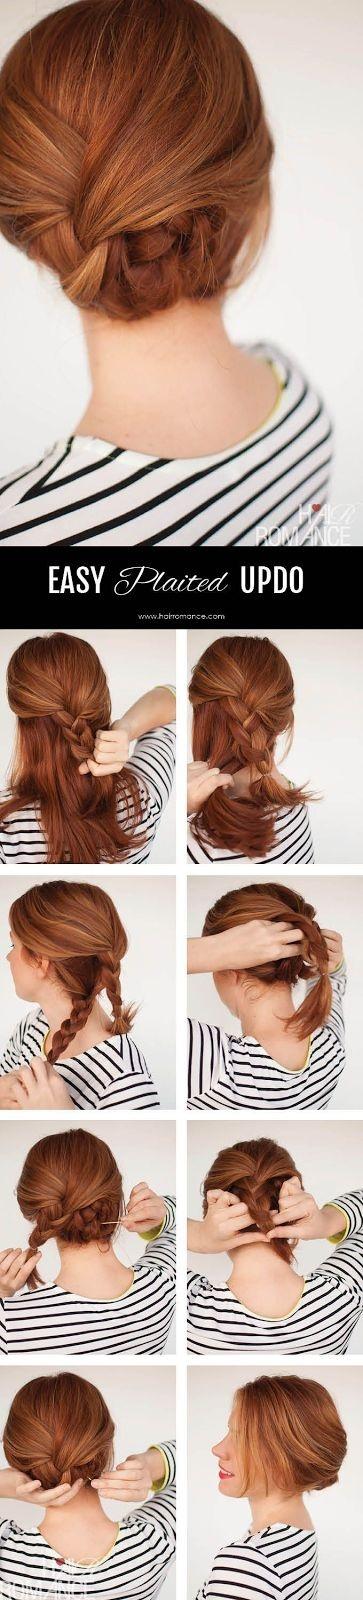 Easy casual updo hairstyles for long hair easy-casual-updo-hairstyles-for-long-hair-54_9